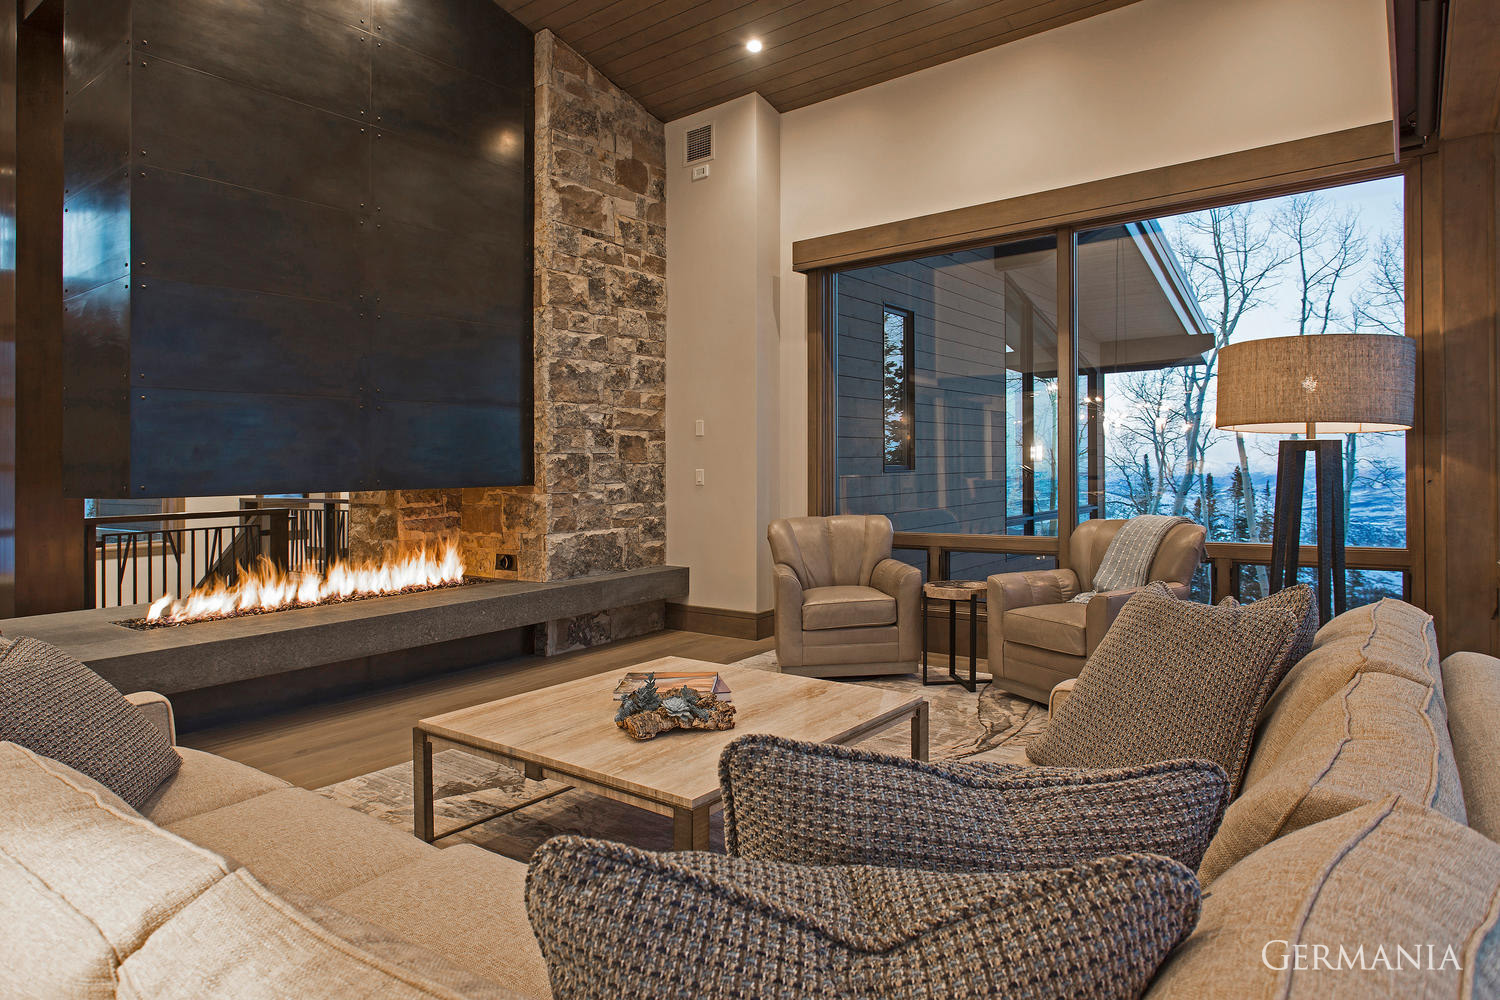 This custom house living room design features a carefully positioned fireplace and window shades to augment your entire mountain home living experience.